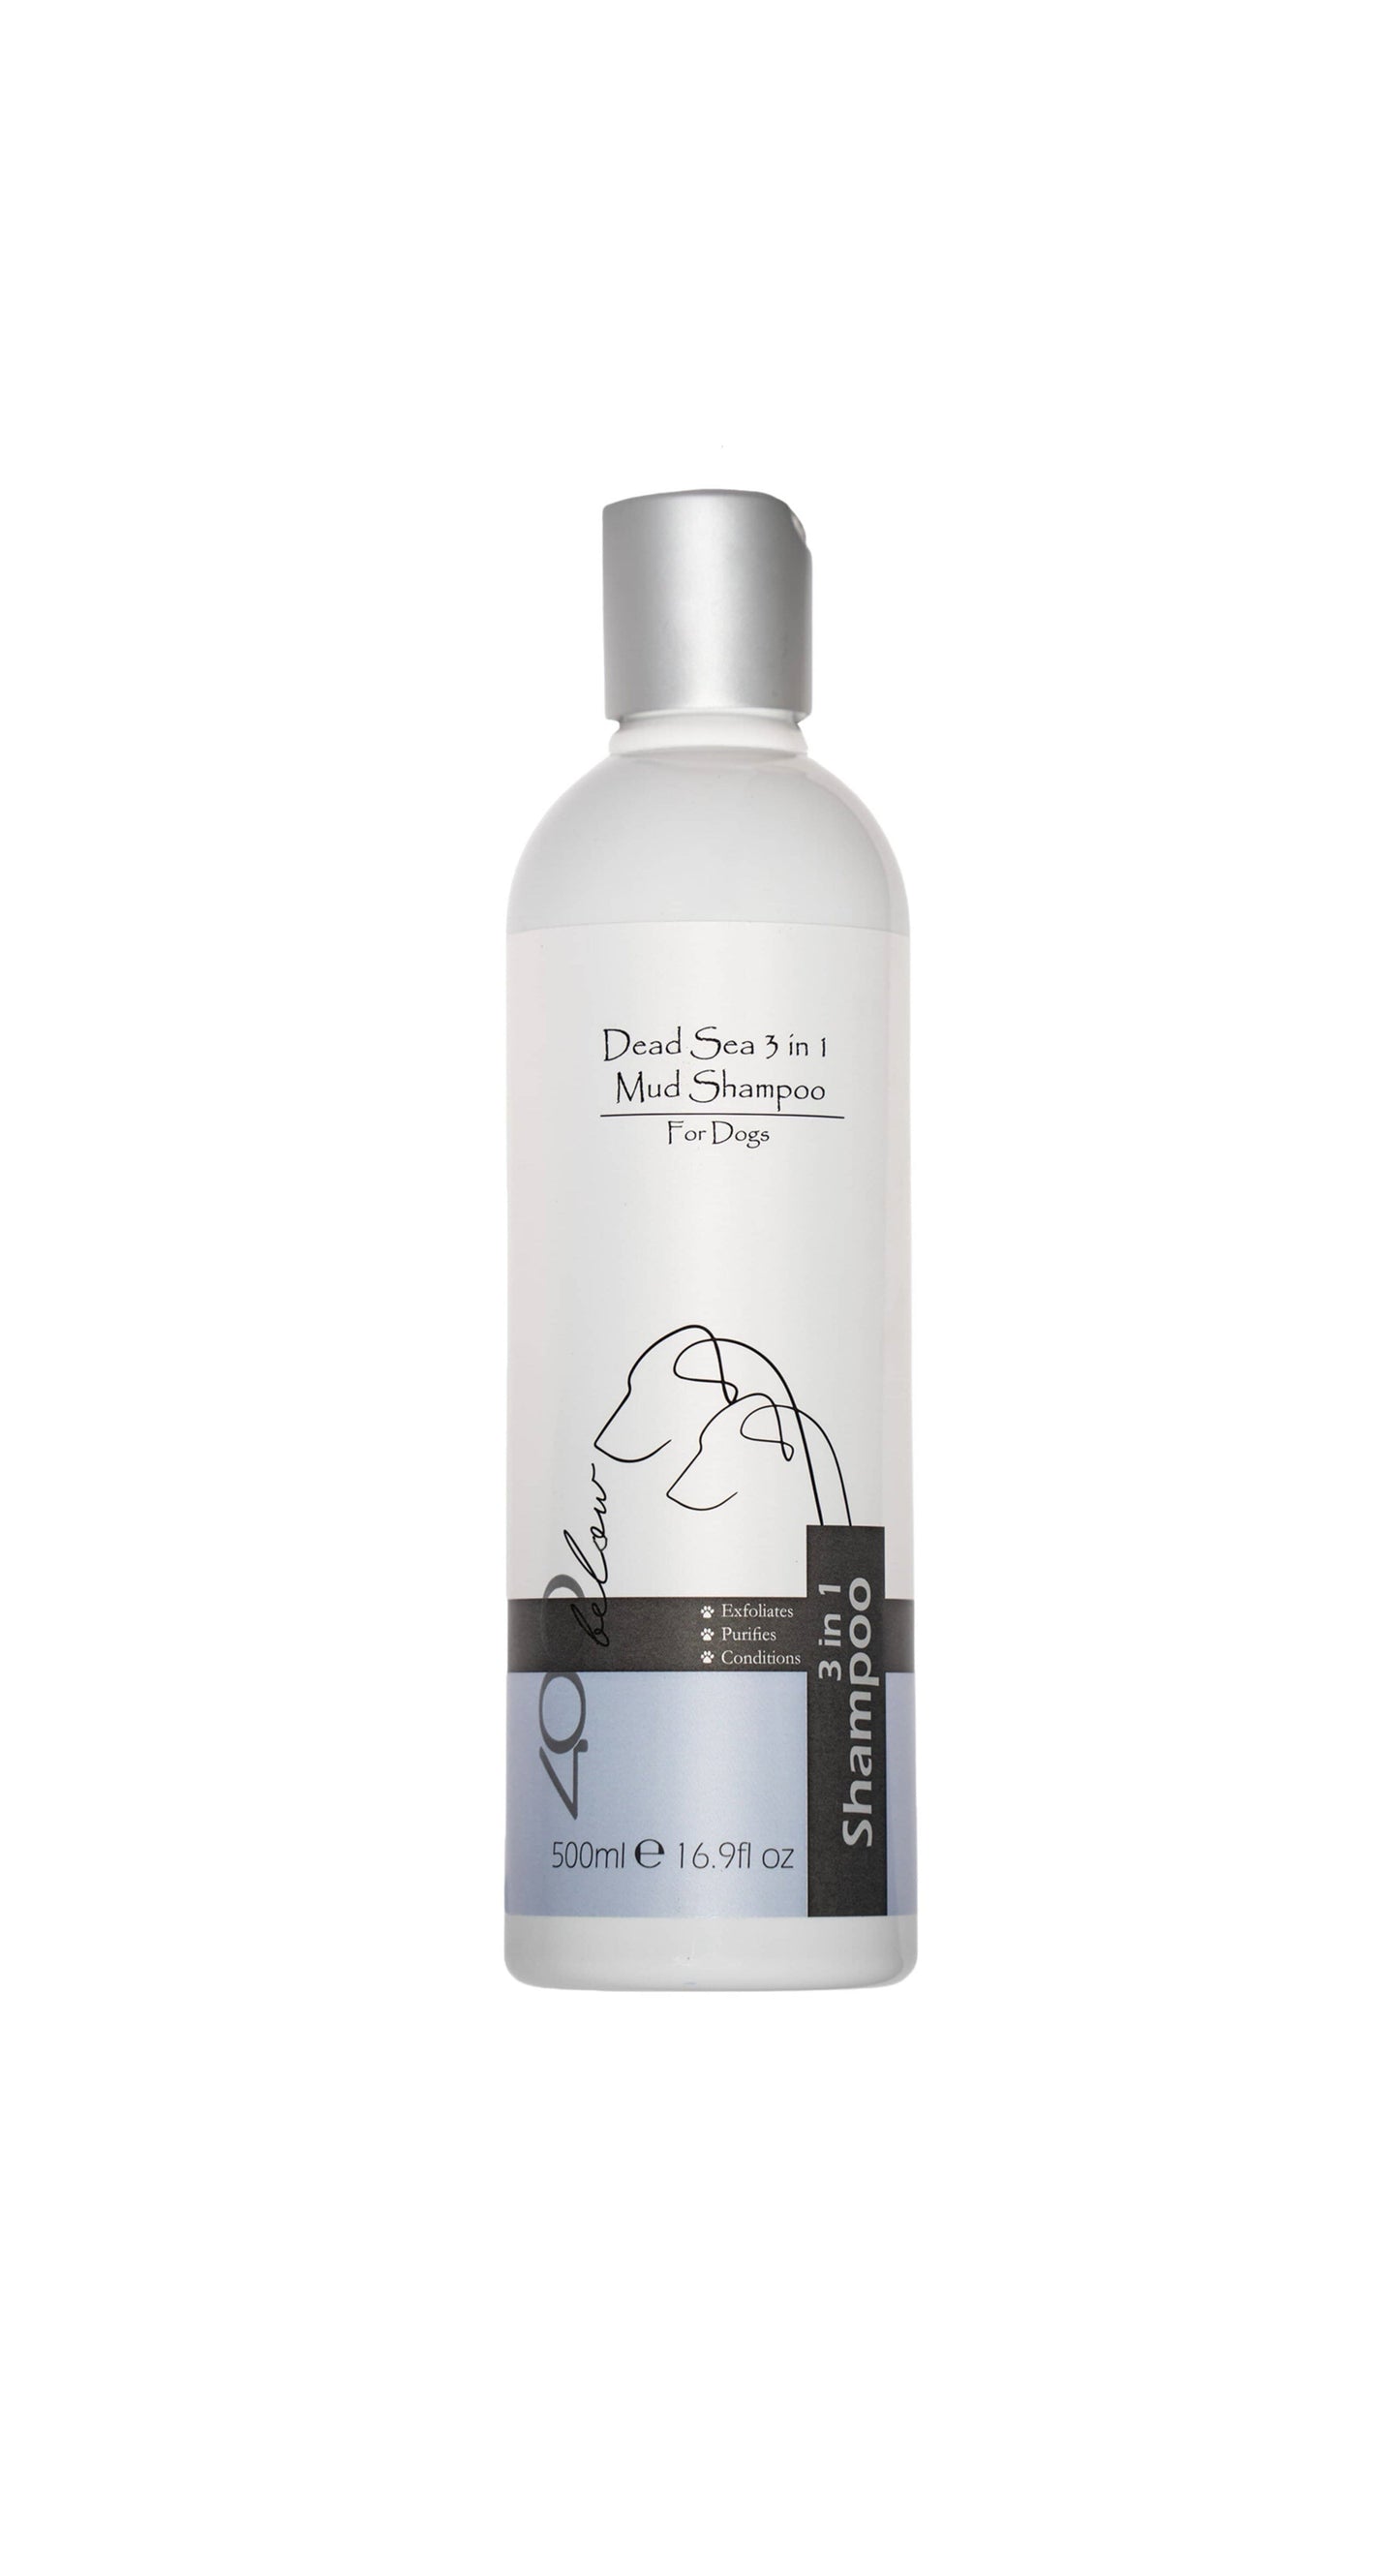 Dead Sea 3 in 1 Mud Shampoo for Dogs Exfoliates, Purifies, Conditions